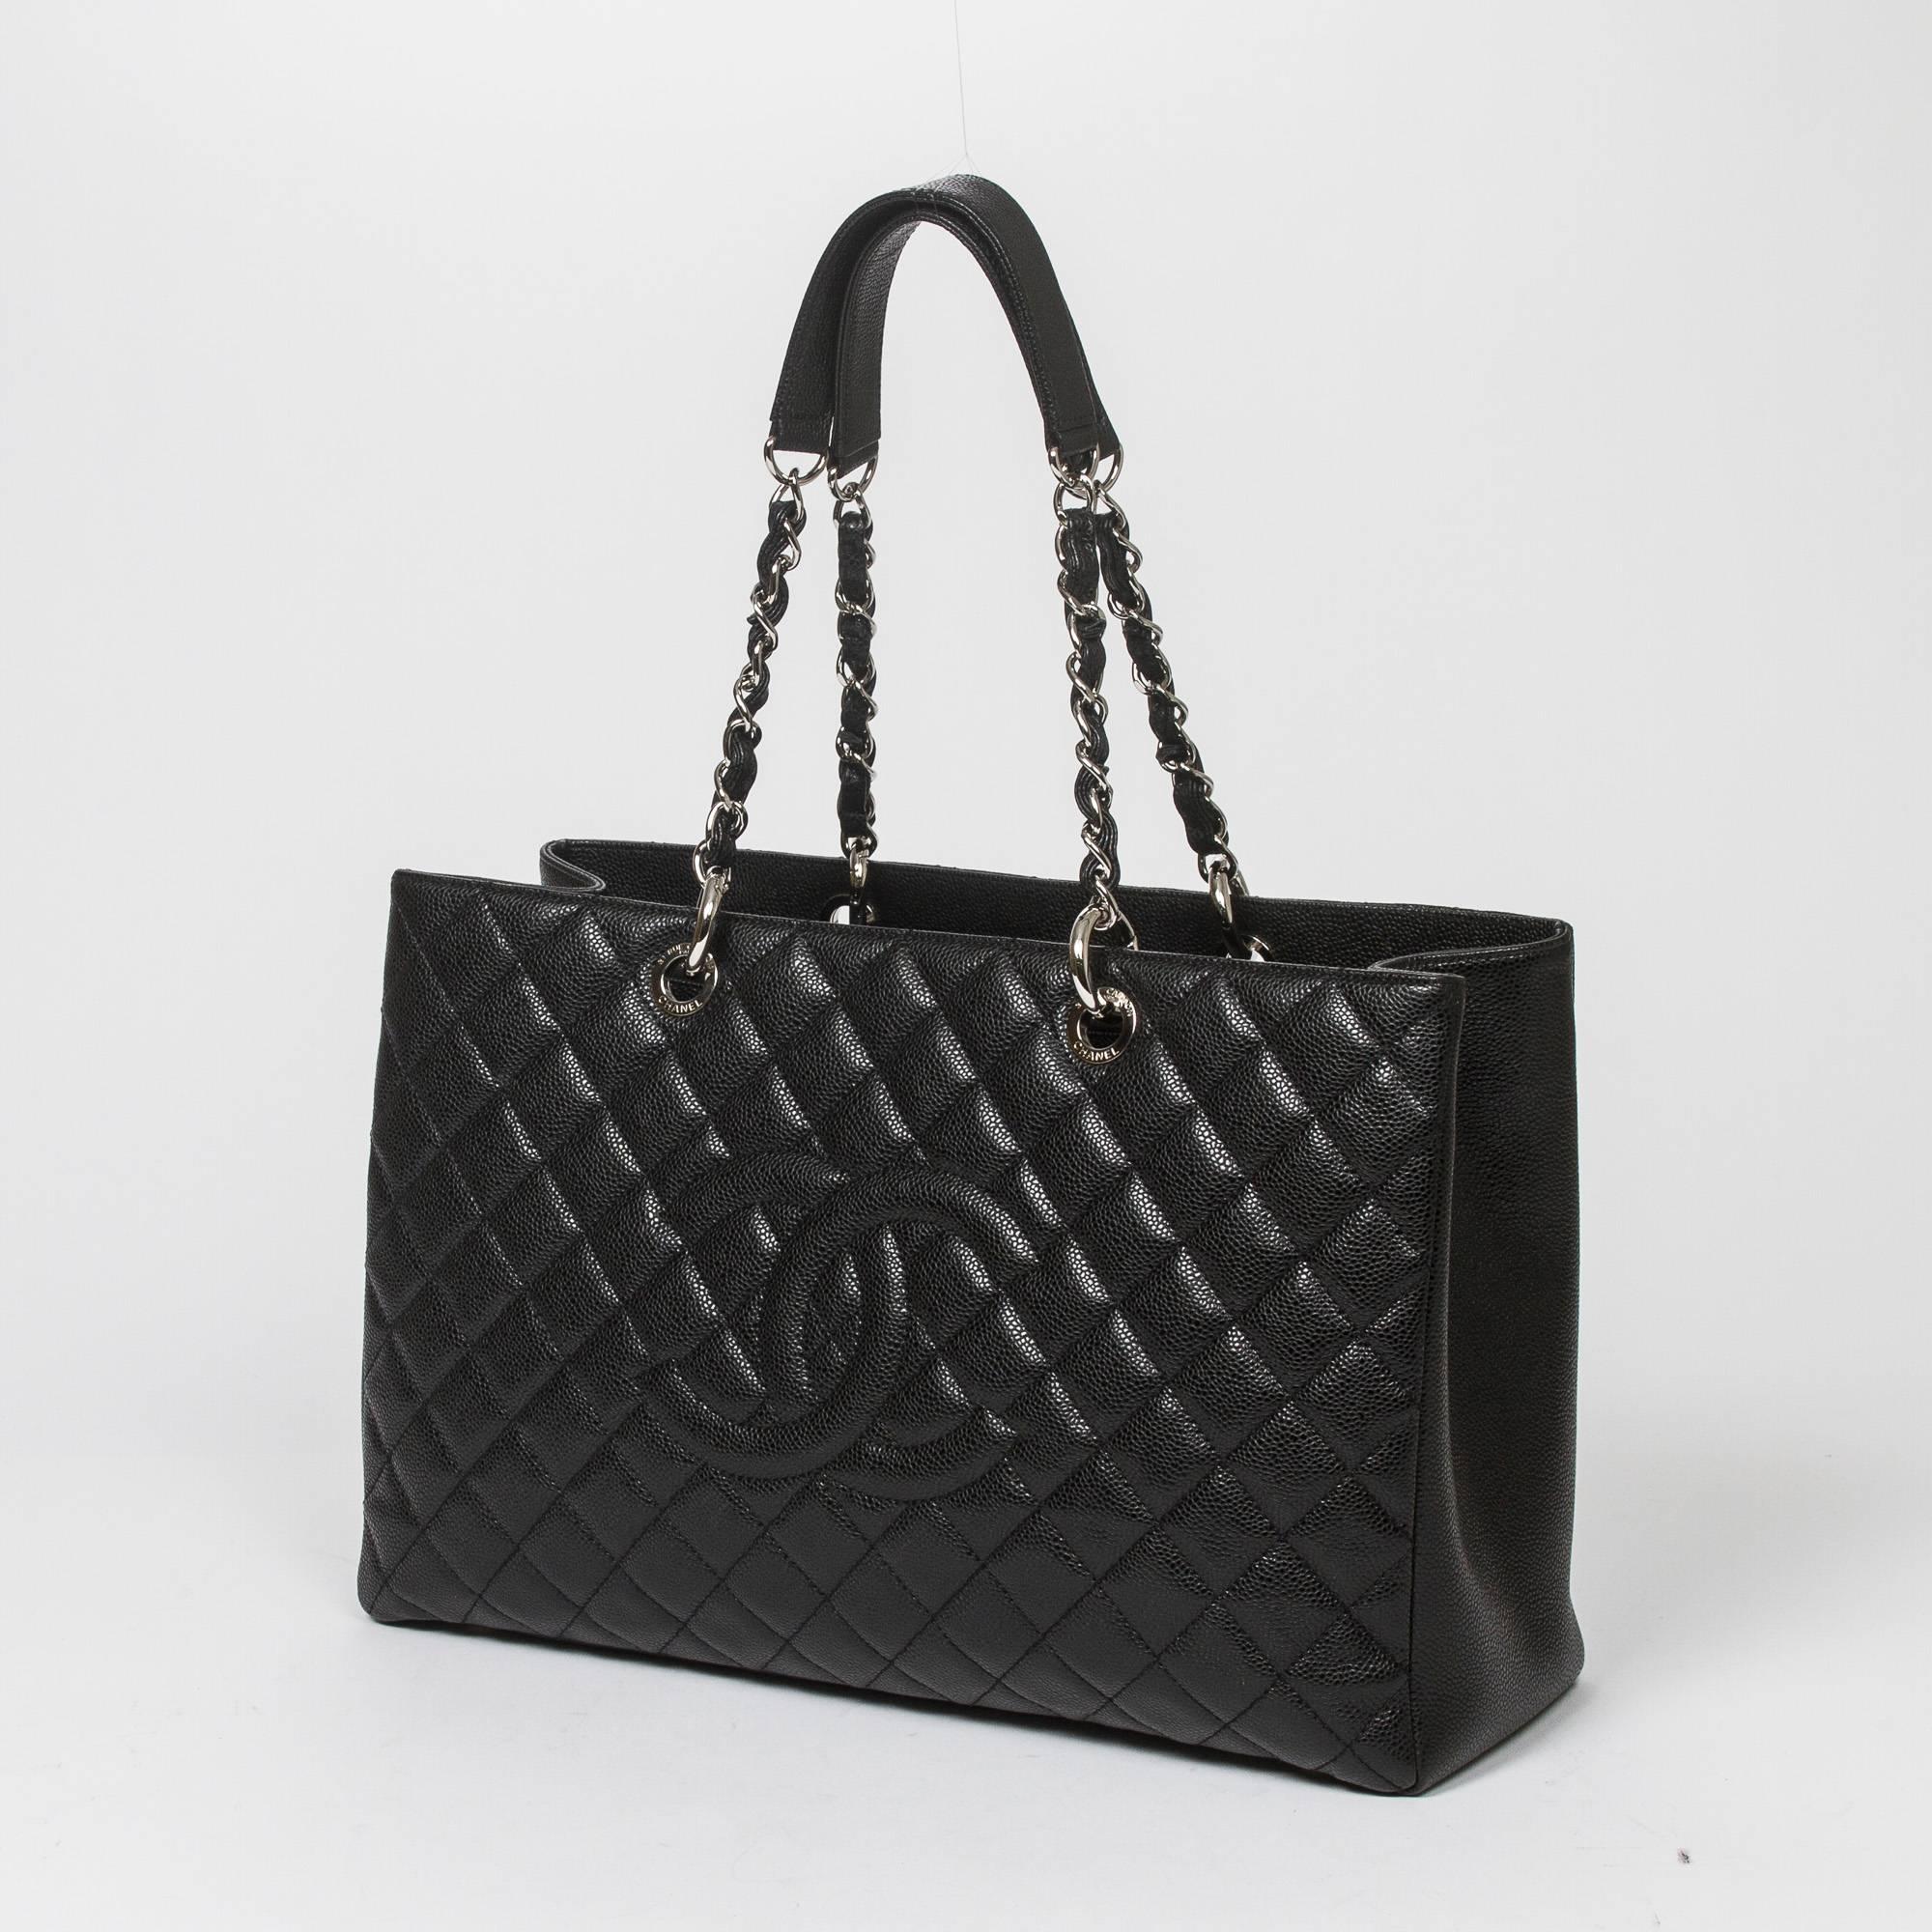 Grand Shopping Tote XL in black quilted caviar leather with chain and leather straps, silver tone hardware. Back slip pocket. 4 protective metal feet at the base. Black satin lined interior with one zipped middle compartment, 2 slip pockets and one